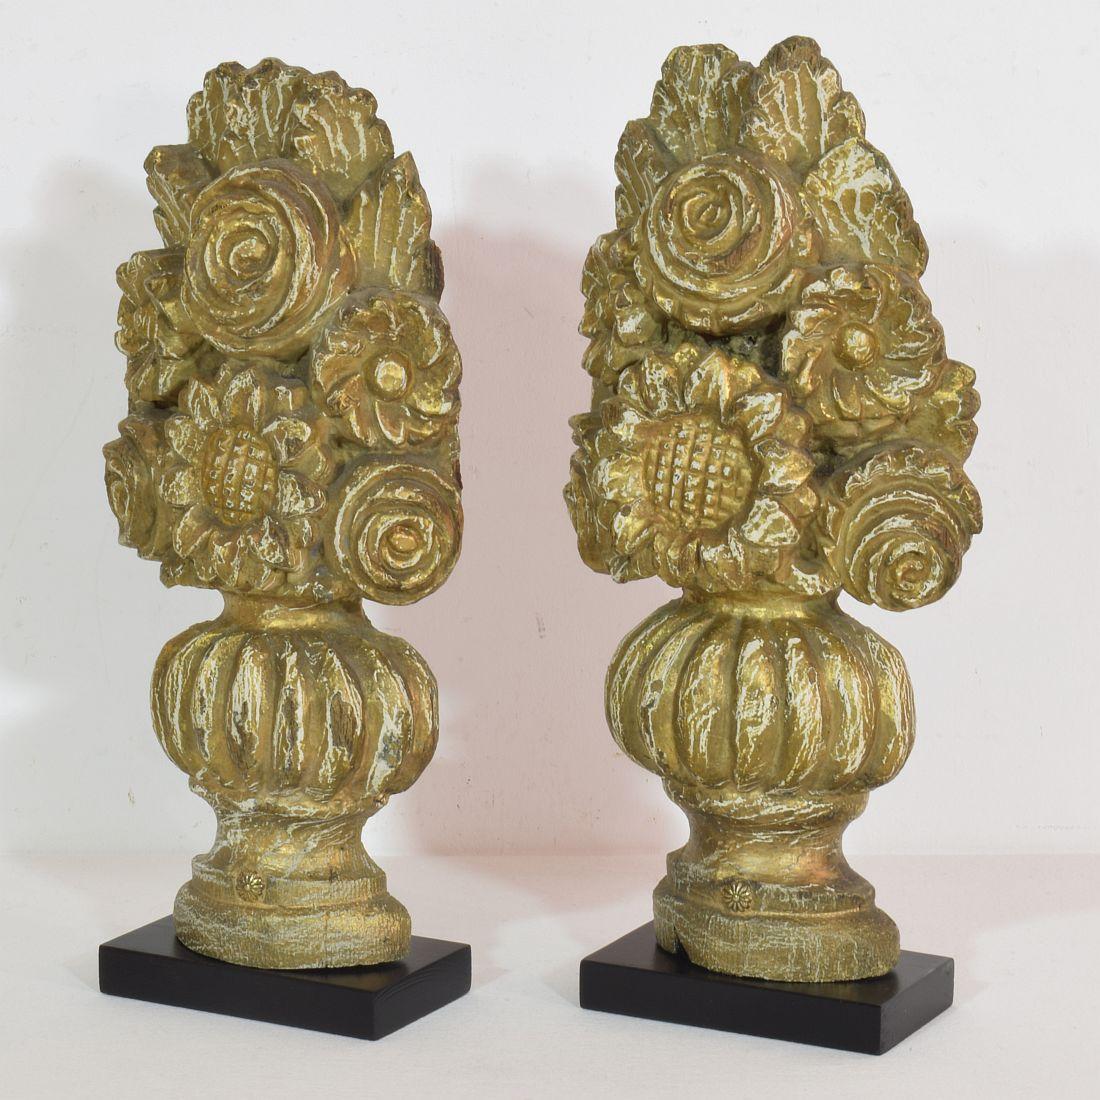 Beautiful 18th century handcarved baroque vase ornaments in a good but weathered condition.
Oak wood with old weathered paint of later date. France, circa 1700- 1750. 
Weathered, small losses and old repairs.
Measurements individual and include